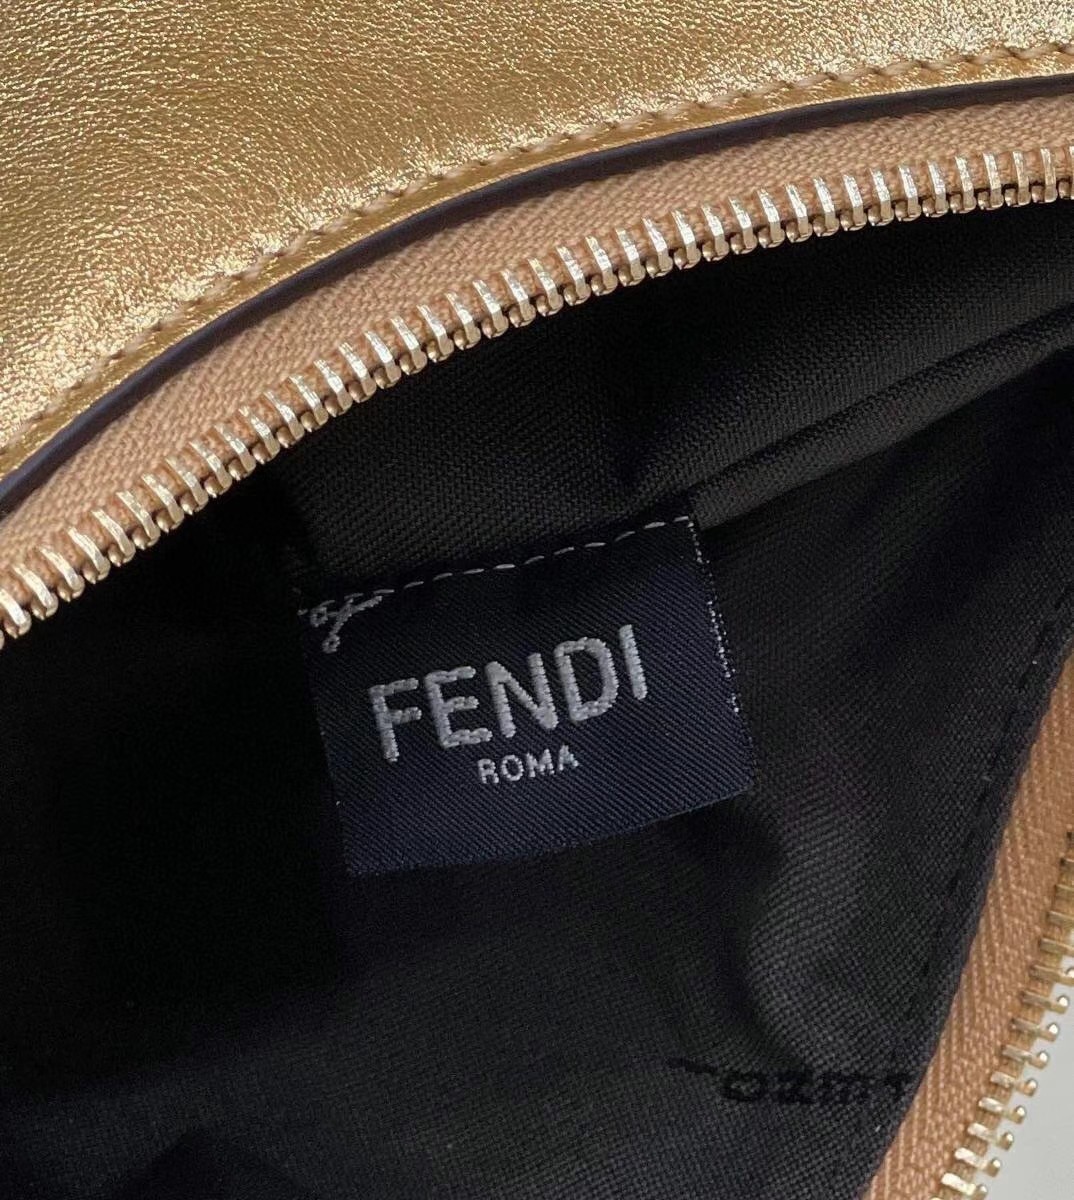 Fendi Fendigraphy Small Hobo Bag In Gold Laminated Leather 579